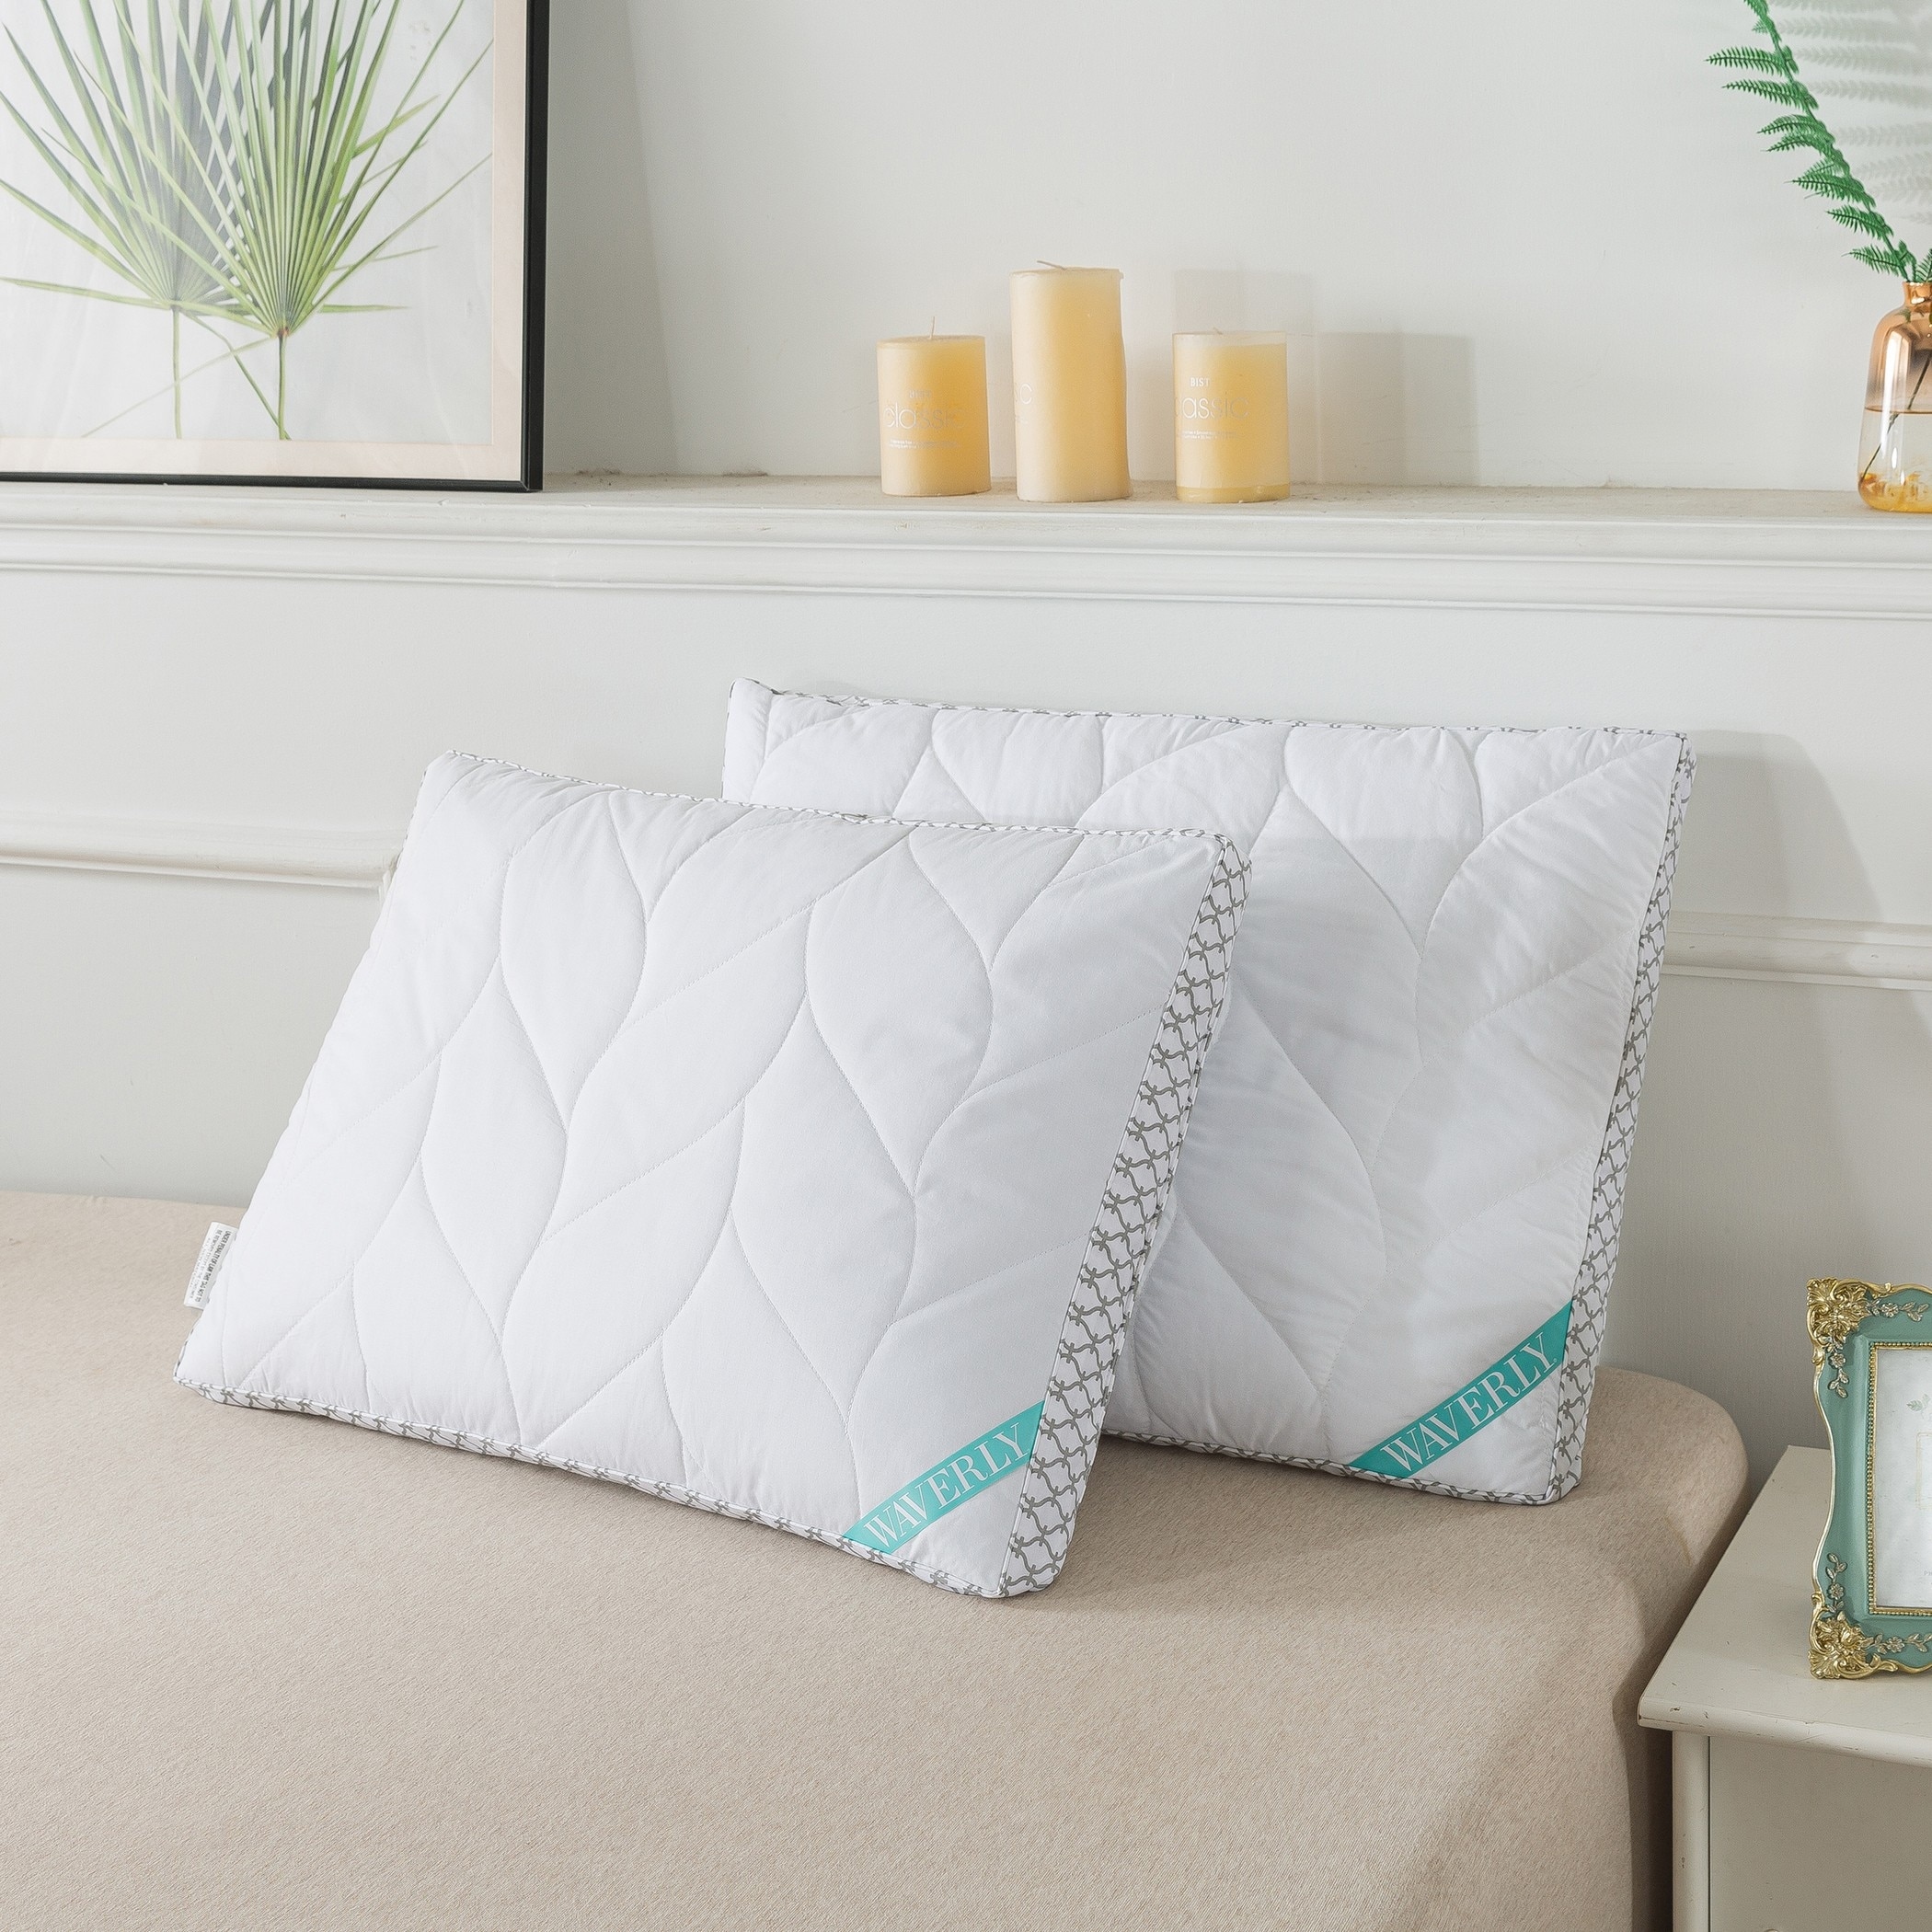 https://ak1.ostkcdn.com/images/products/is/images/direct/a0bee146e33273953d4c703ac114458ab6019a82/Waverly-Antimicrobial-Quilted-Nano-Feather-Pillow-with-Gusset.jpg